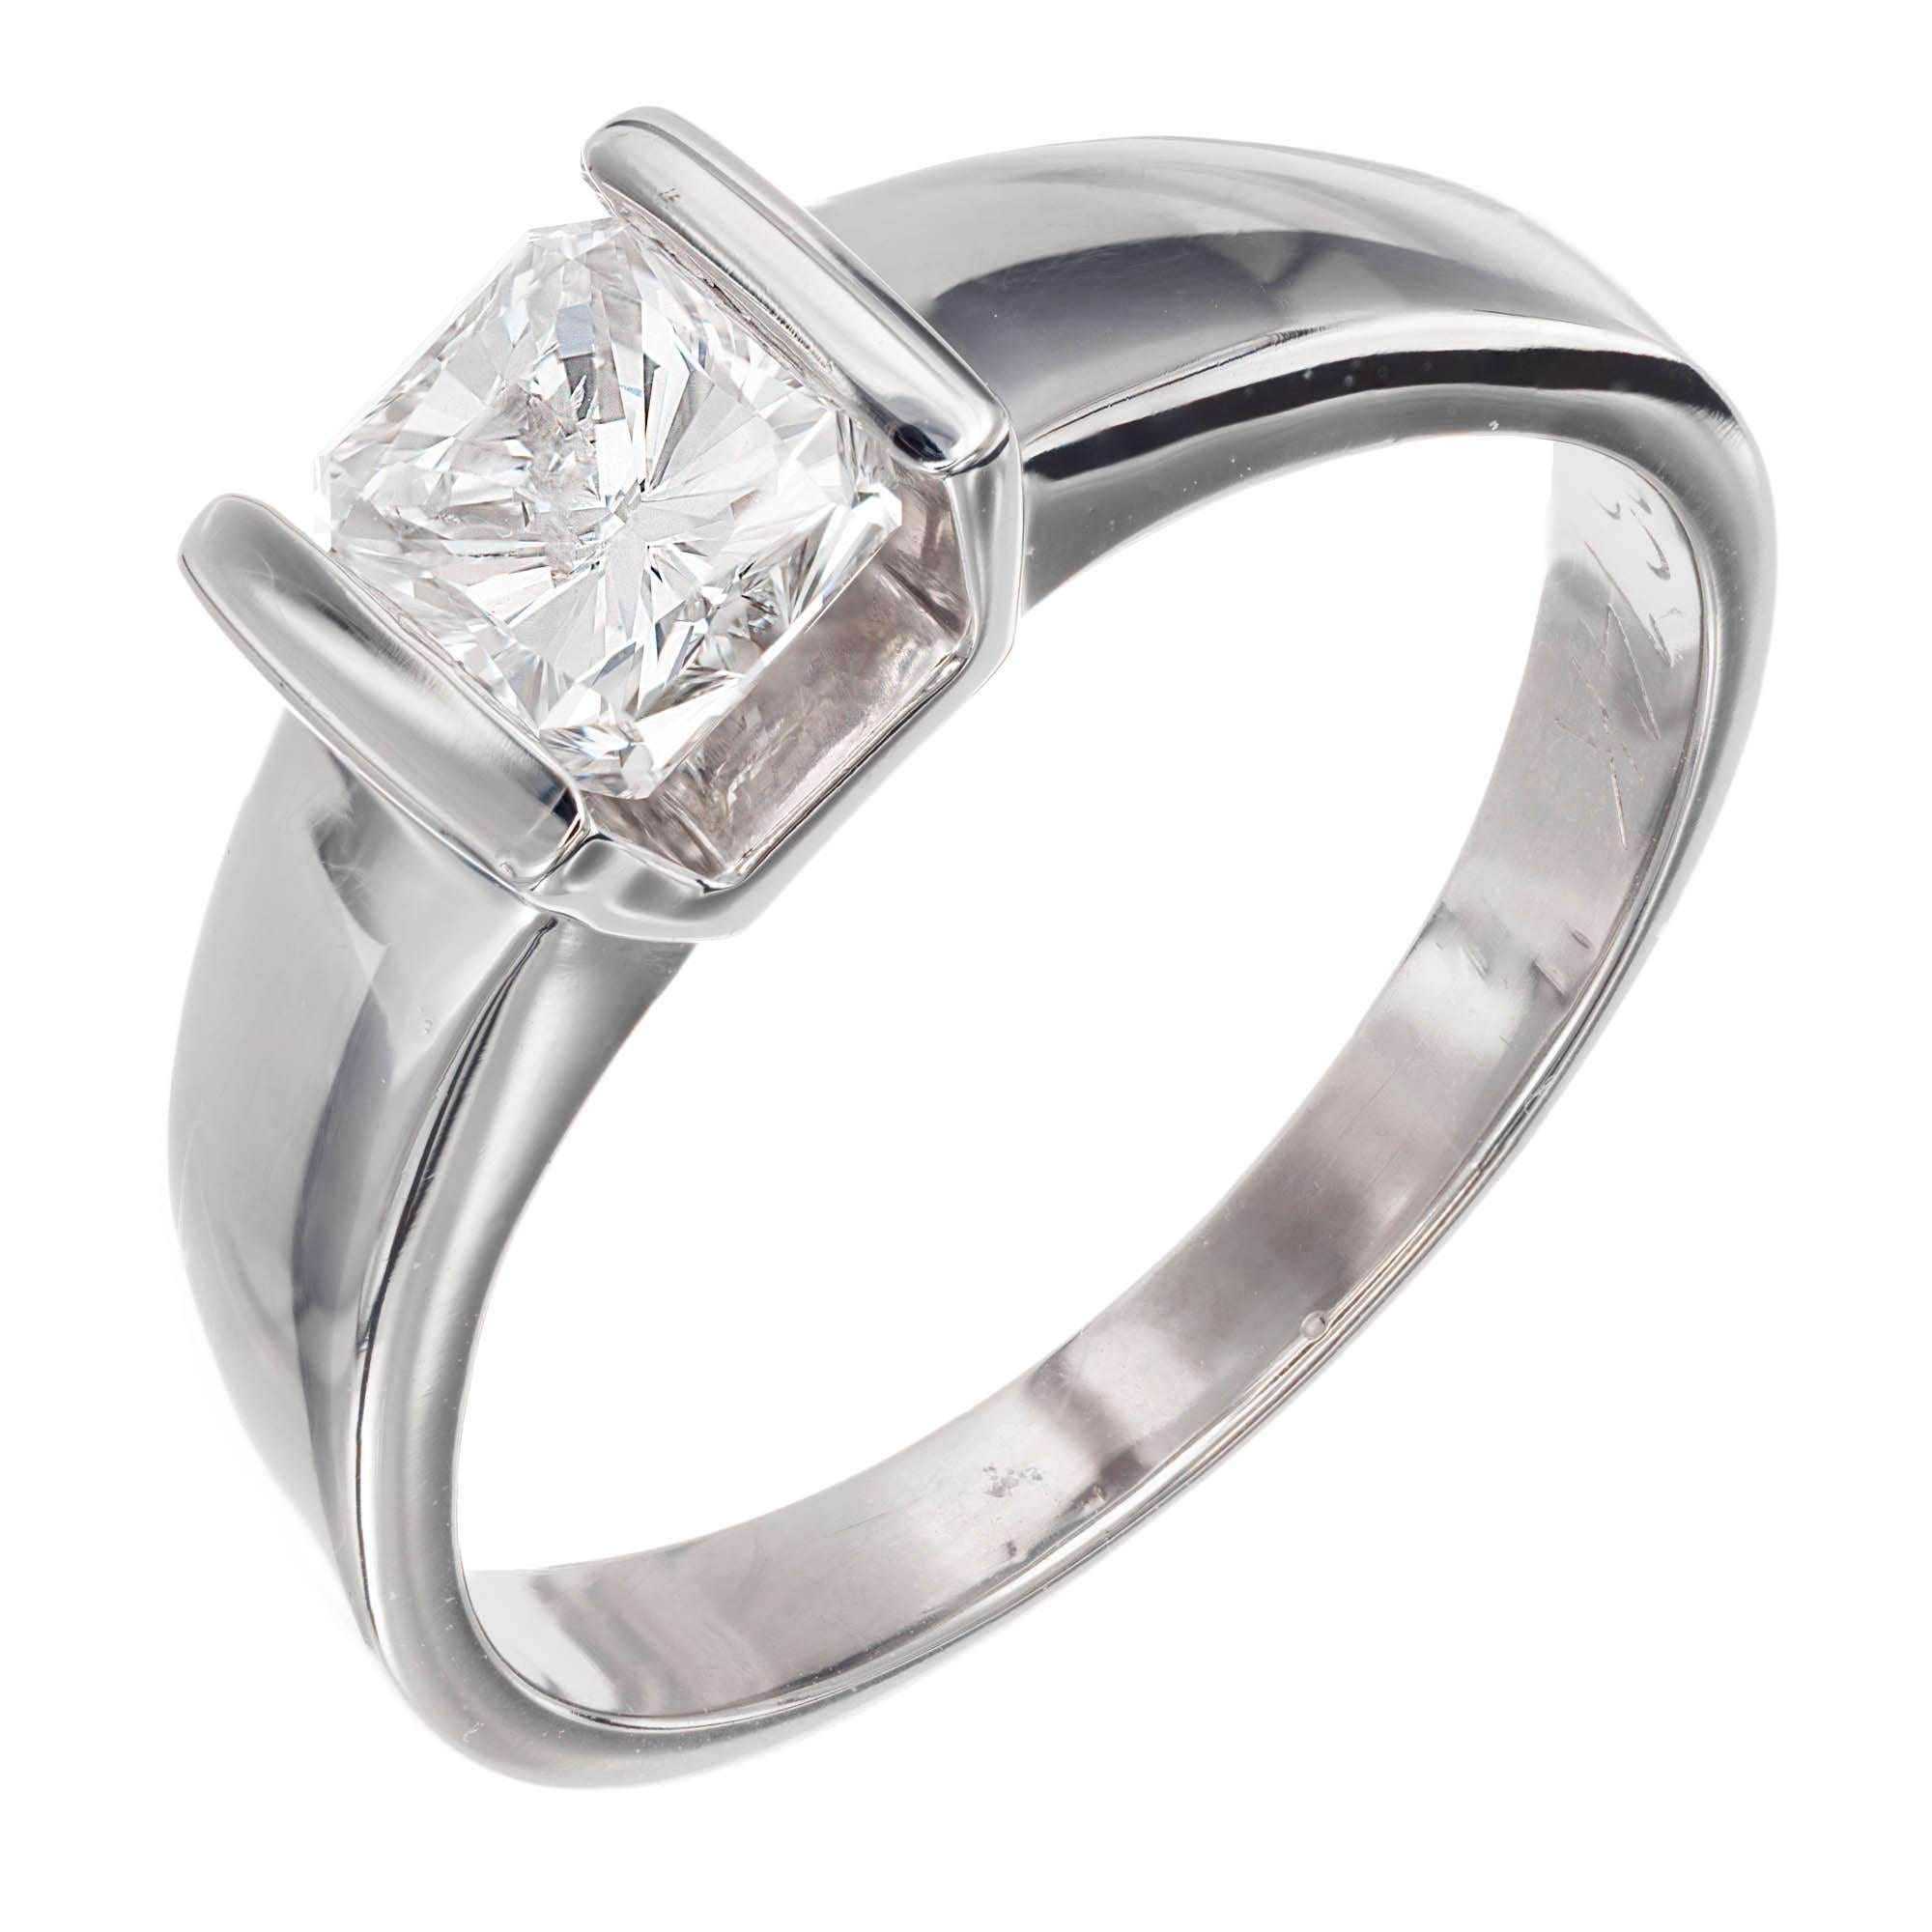 1.00 Carat Radiant Cut Diamond White Gold Solitaire Engagement Ring